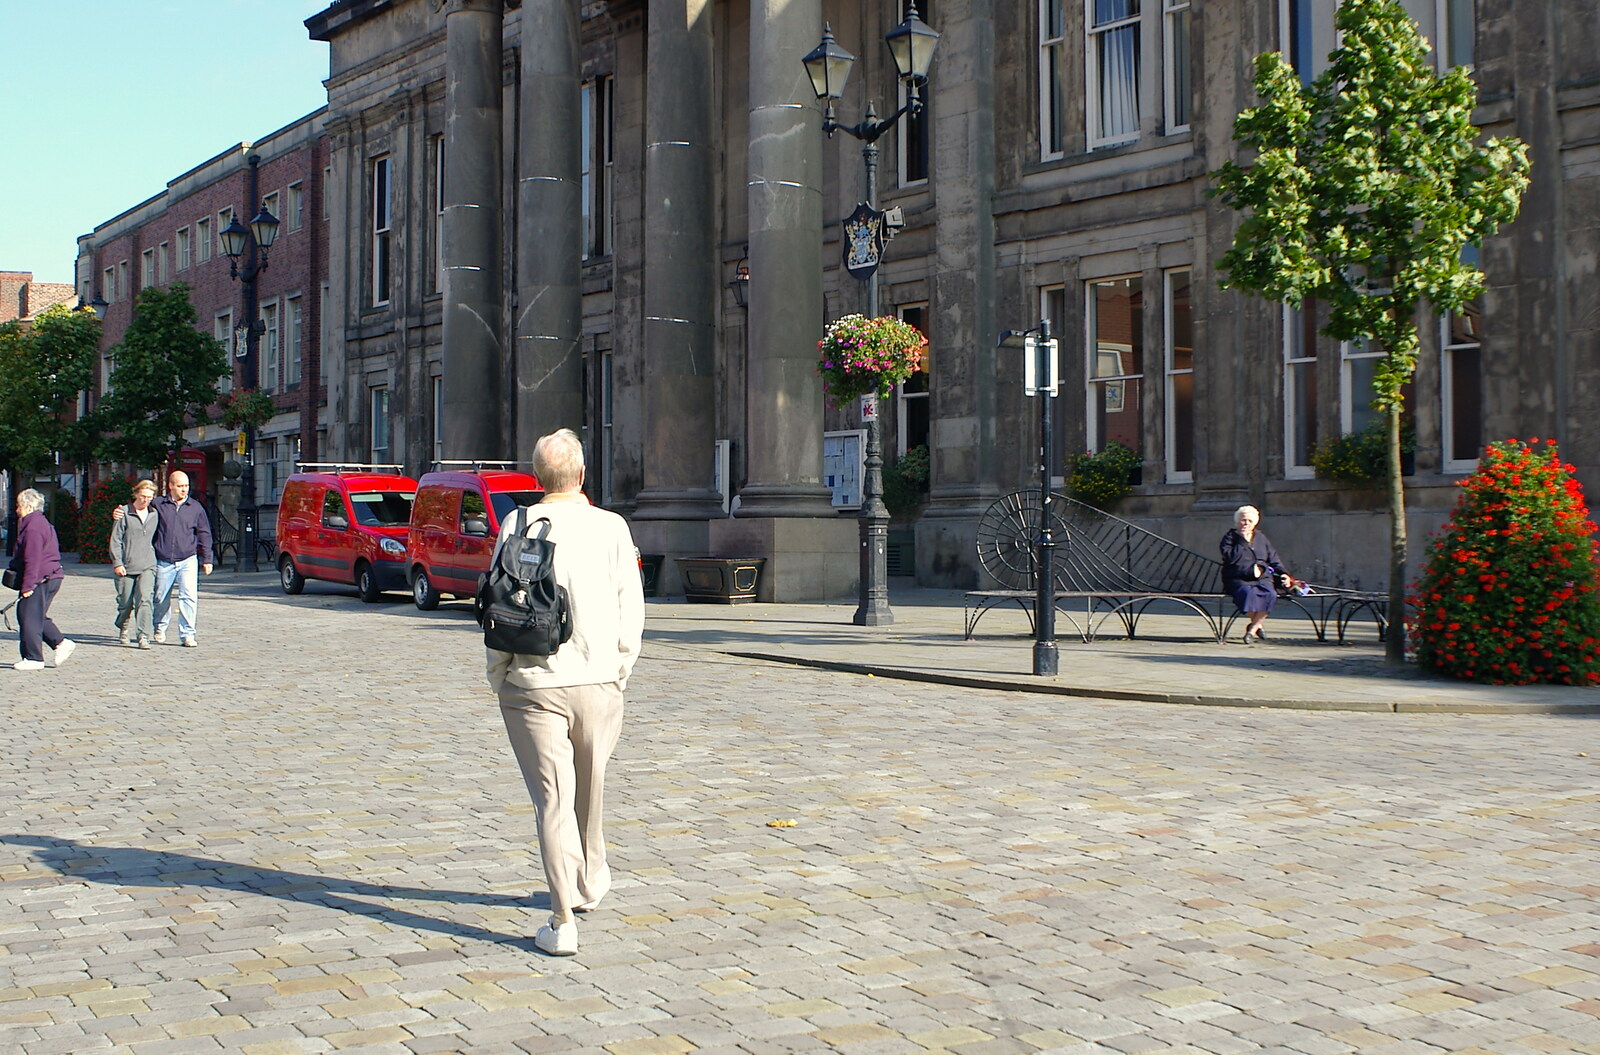 A Trip Around Macclesfield and Sandbach, Cheshire - 10th September 2005: The Old Chap heads off to the town hall